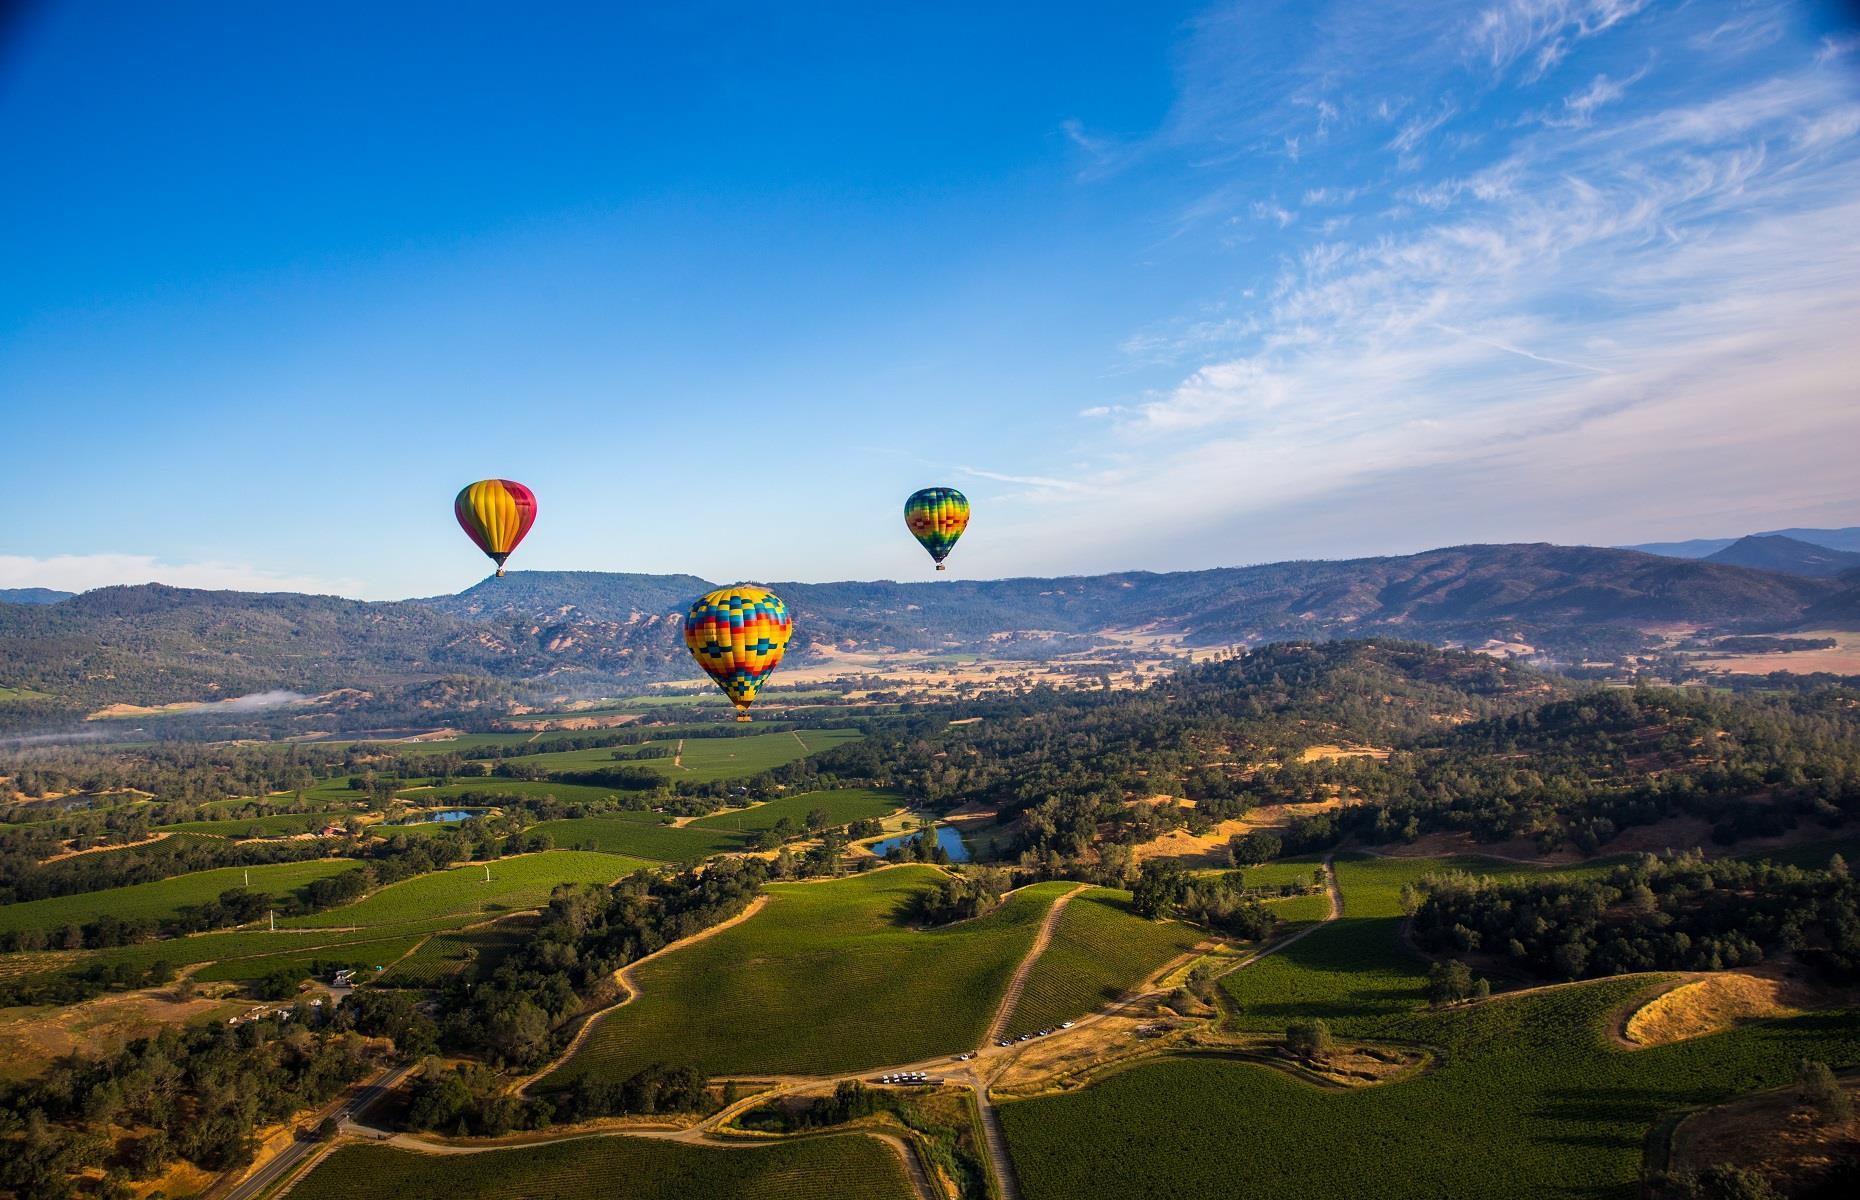 <p>Known for its hundreds of hillside vineyards and world-class vintages, <a href="https://www.loveexploring.com/guides/82205/an-areabyarea-guide-to-californias-wine-regions">California</a>'s Napa Valley is as glorious to look at as its wines are to sip. Experience America's iconic wine country like never before by taking a <a href="https://napavalleyballoons.com/">Napa Valley hot air balloon tour</a>. Rise early for a sunrise hot air balloon trip to savor the splendor of the landscape, before touching down to sample some of the region's best bottles.</p>